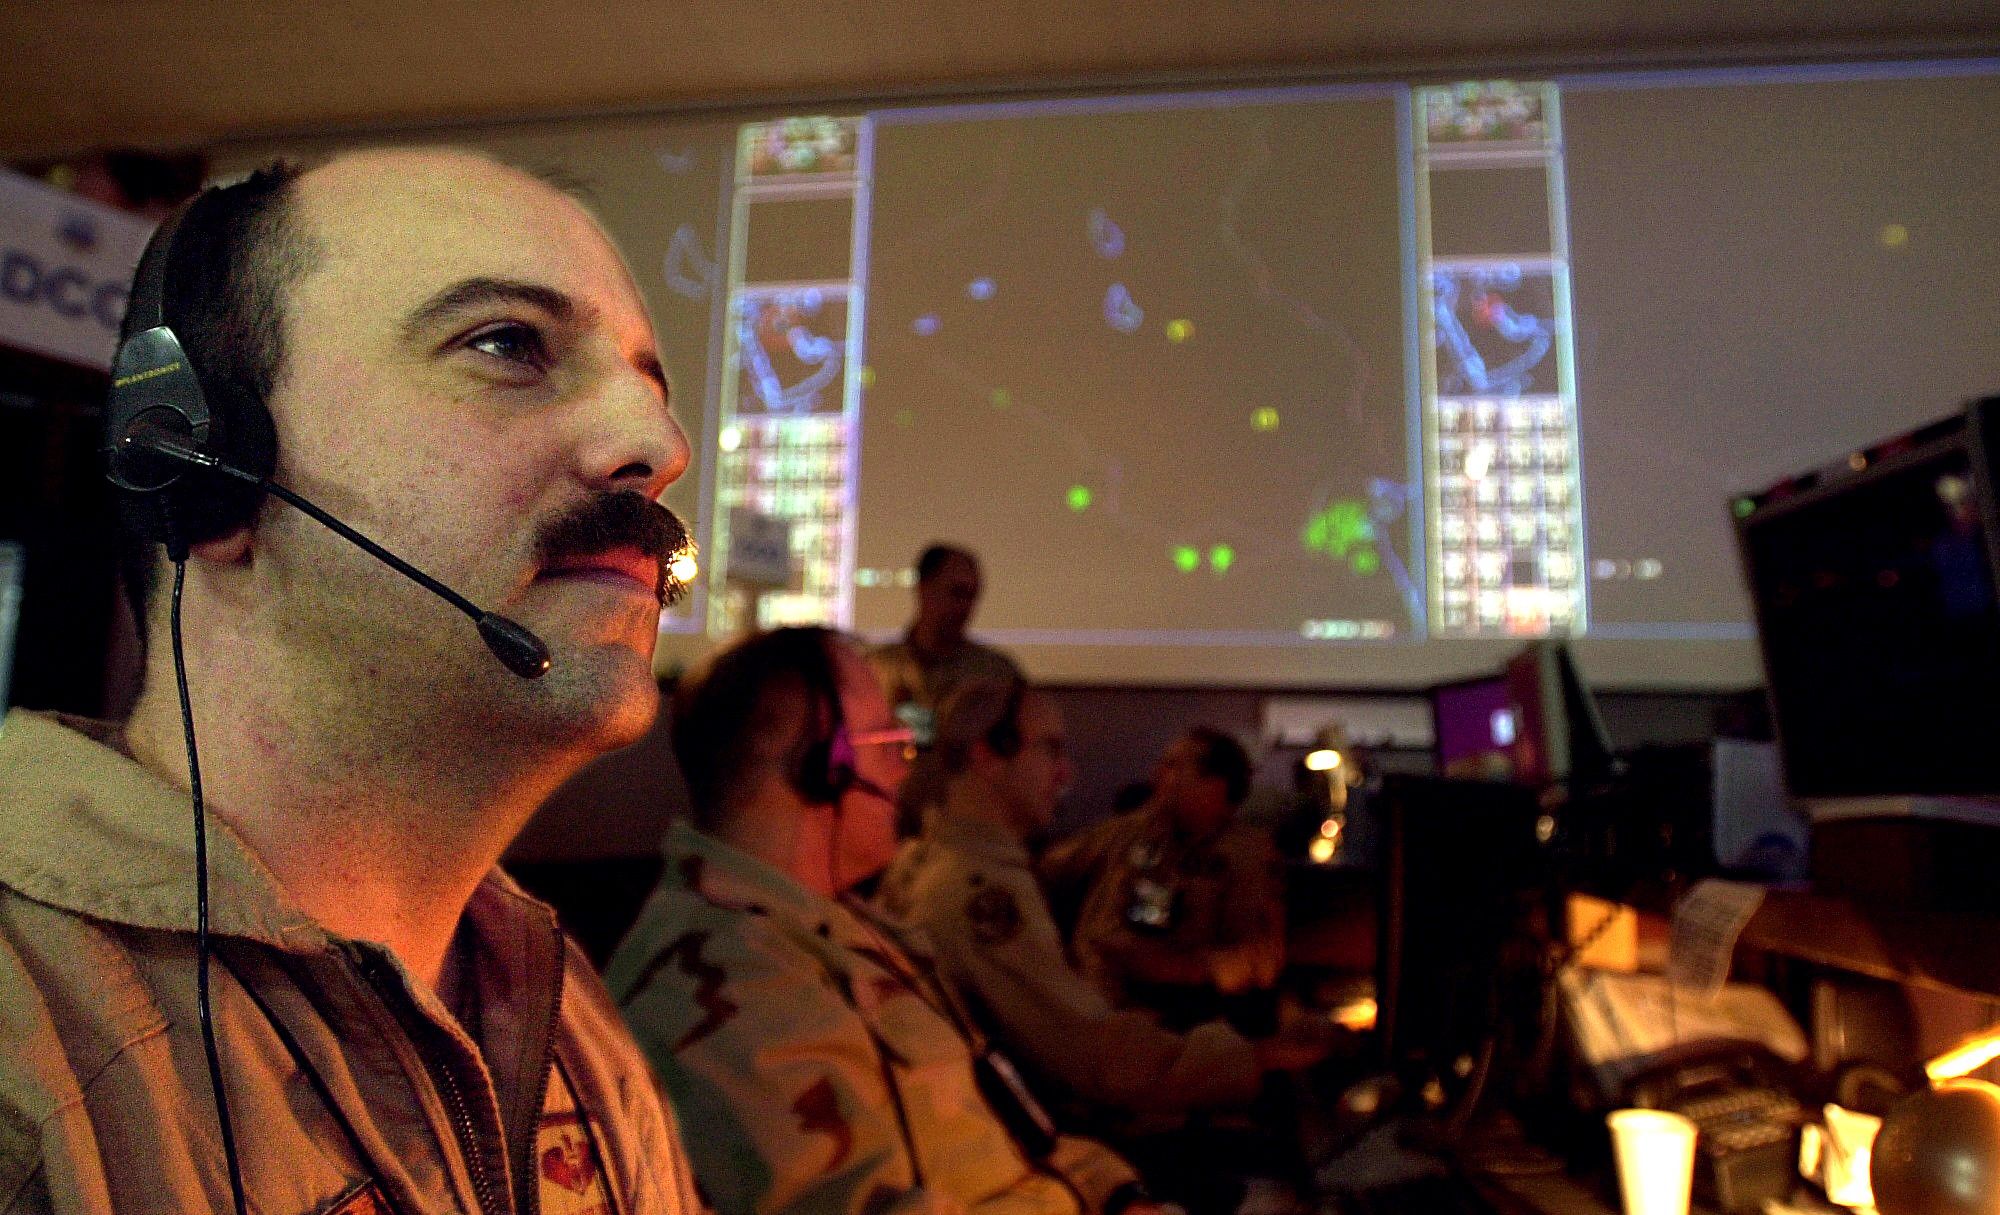 The Pentagon’s secret pre-crime program to know your thoughts, predict your future